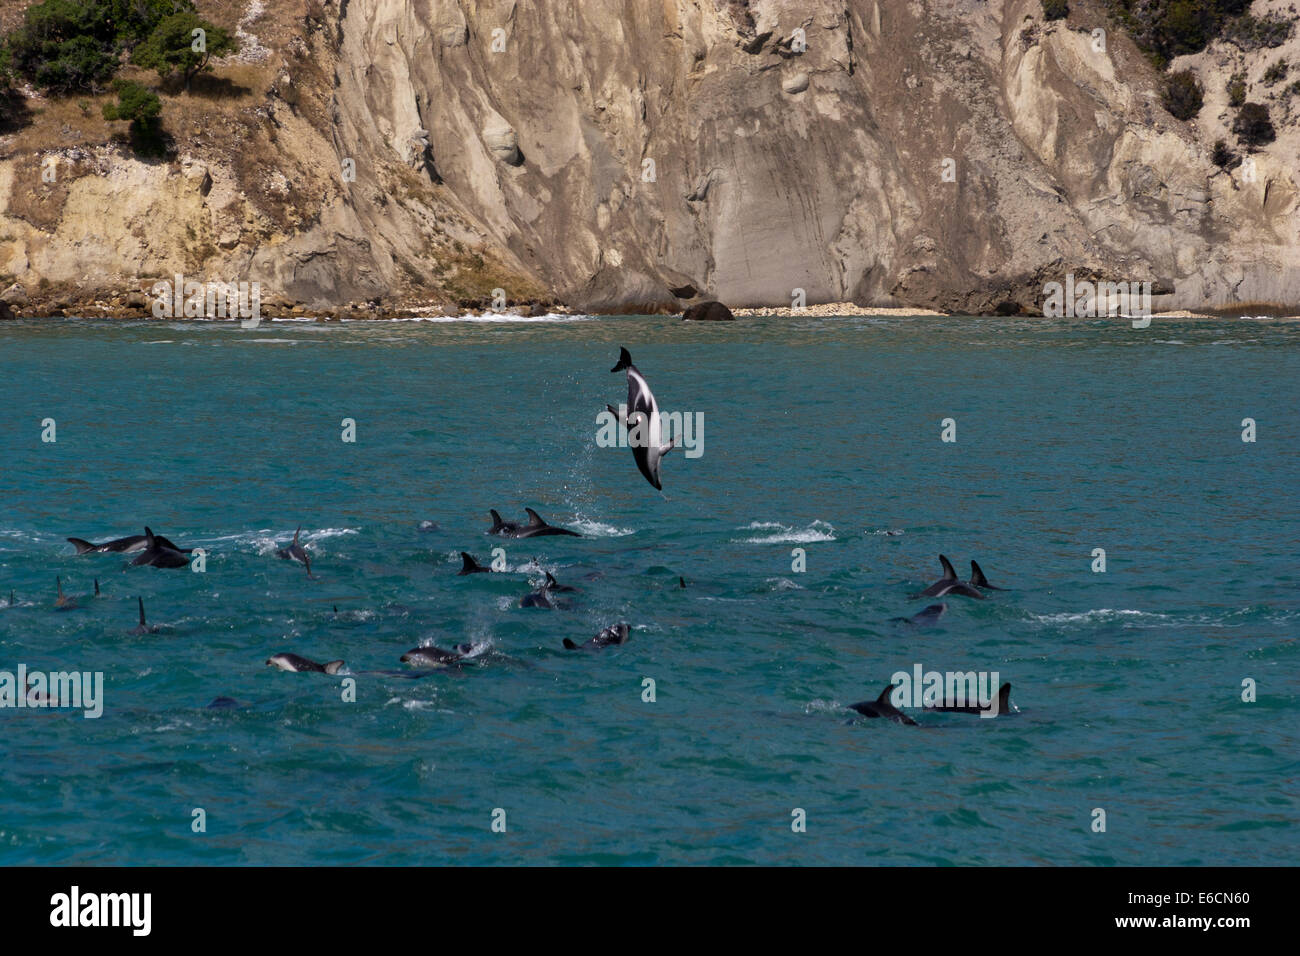 Somersaulting dusky dolphins (Lagenorhynchus obscurus) Stock Photo